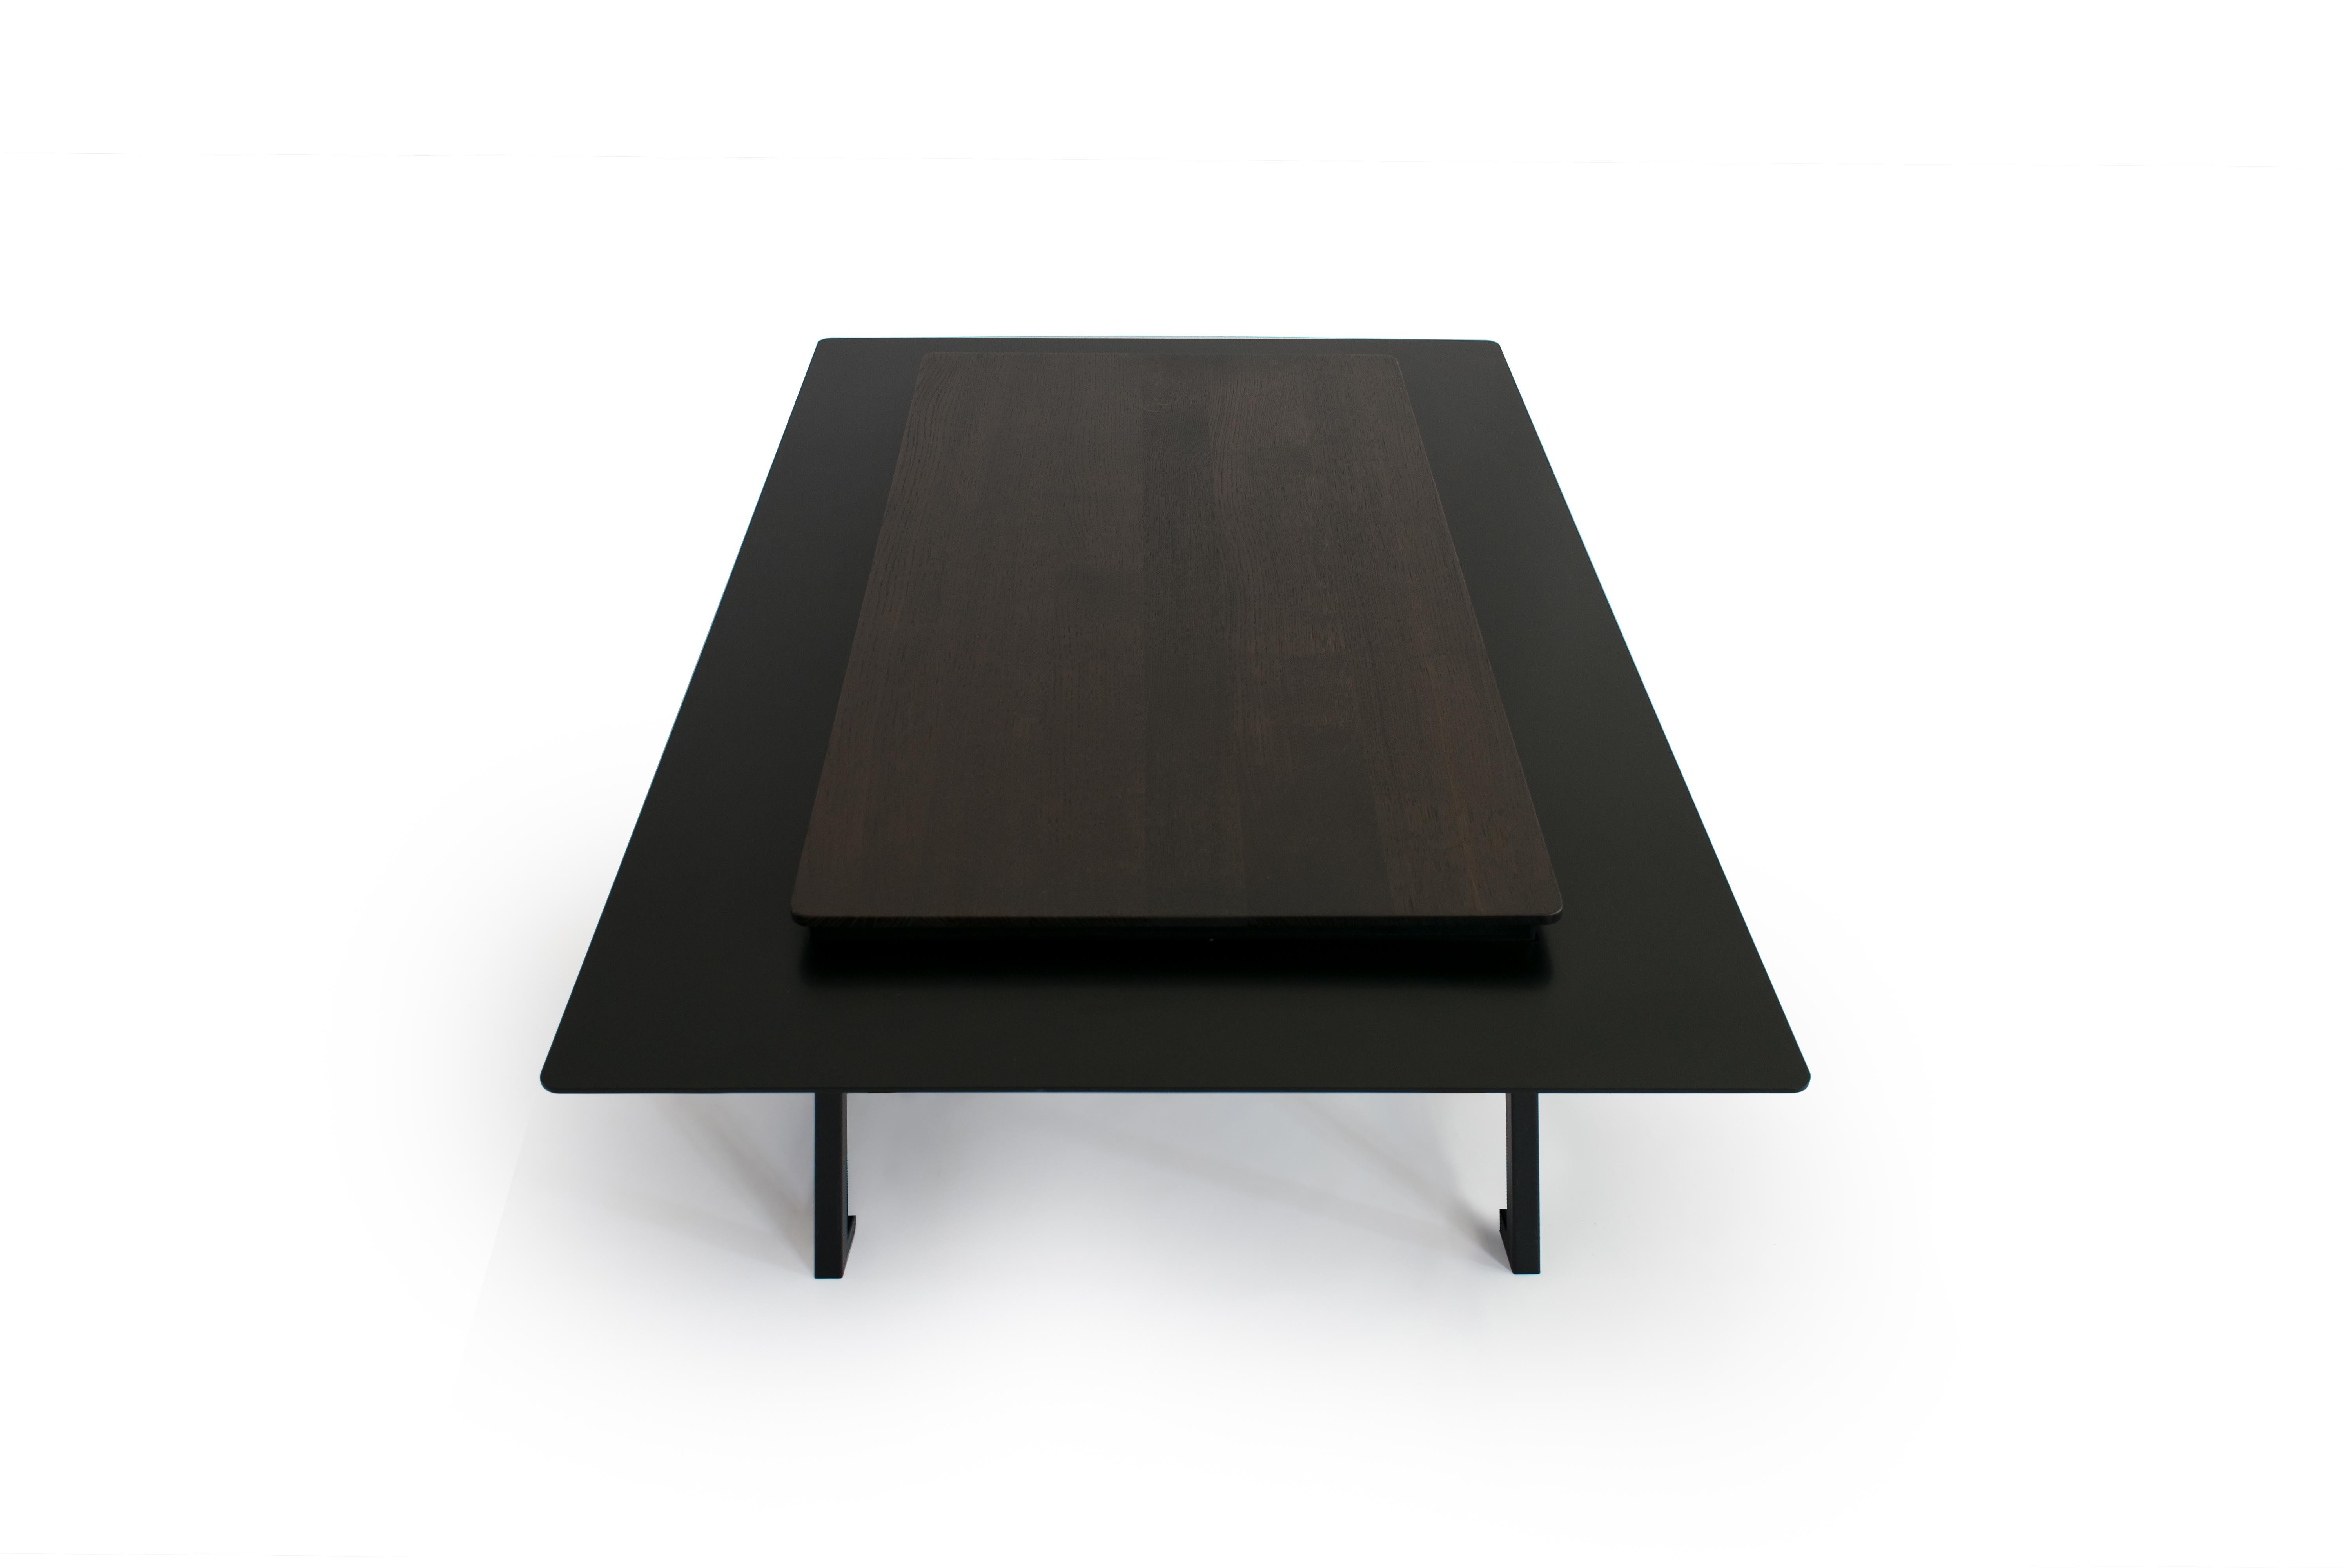 Tungen coffee table, Jan Garncarek
Materials: steel, wood.
Dimensions: 33 x 130 x 80 cm.
Weight: 60 kg

The table consists of a wood top with a metal collar. This will enable the separation of everyday objects from those, that we want to expose